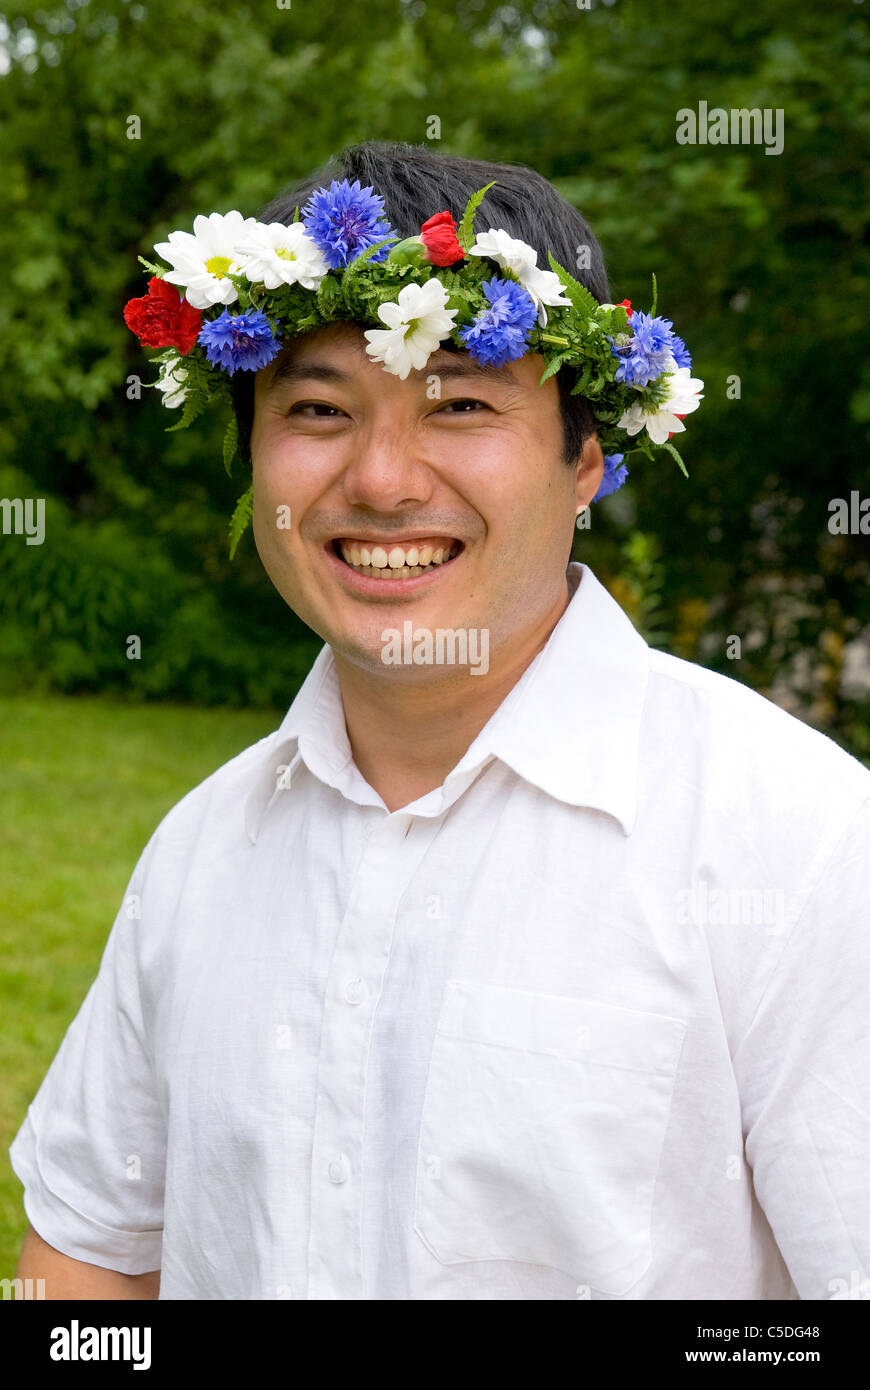 Portrait of an Asian man in floral wreath smiling outdoors Stock Photo